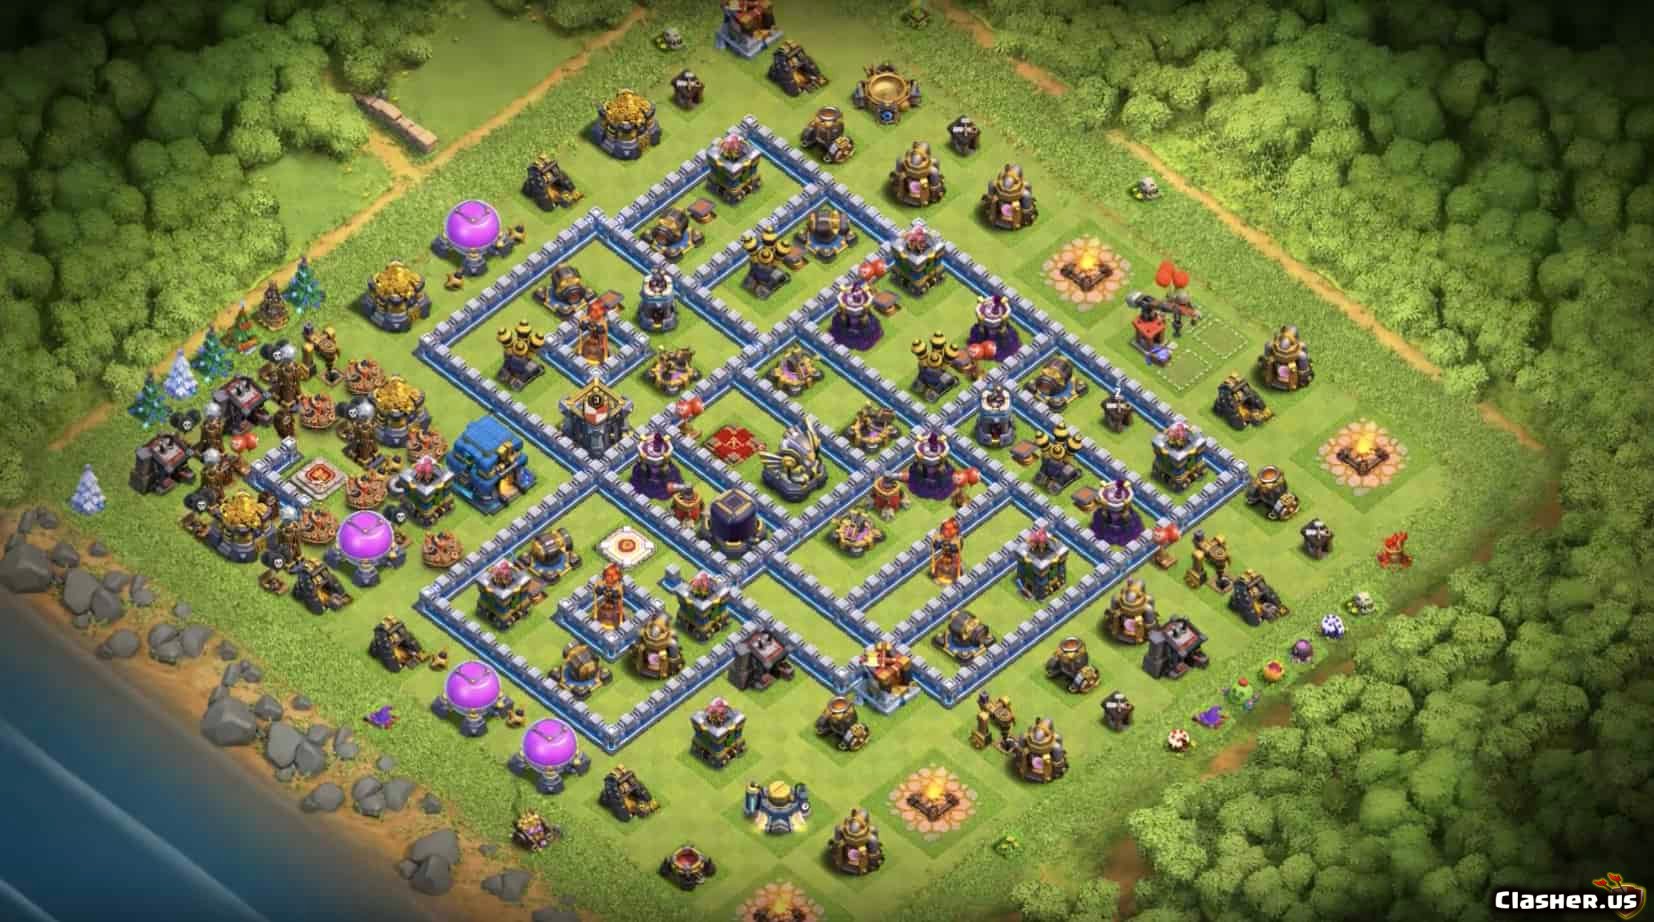 Town Hall 12 The TH12 Trophy Base - Below 50% 1-Stars and also failed attac...